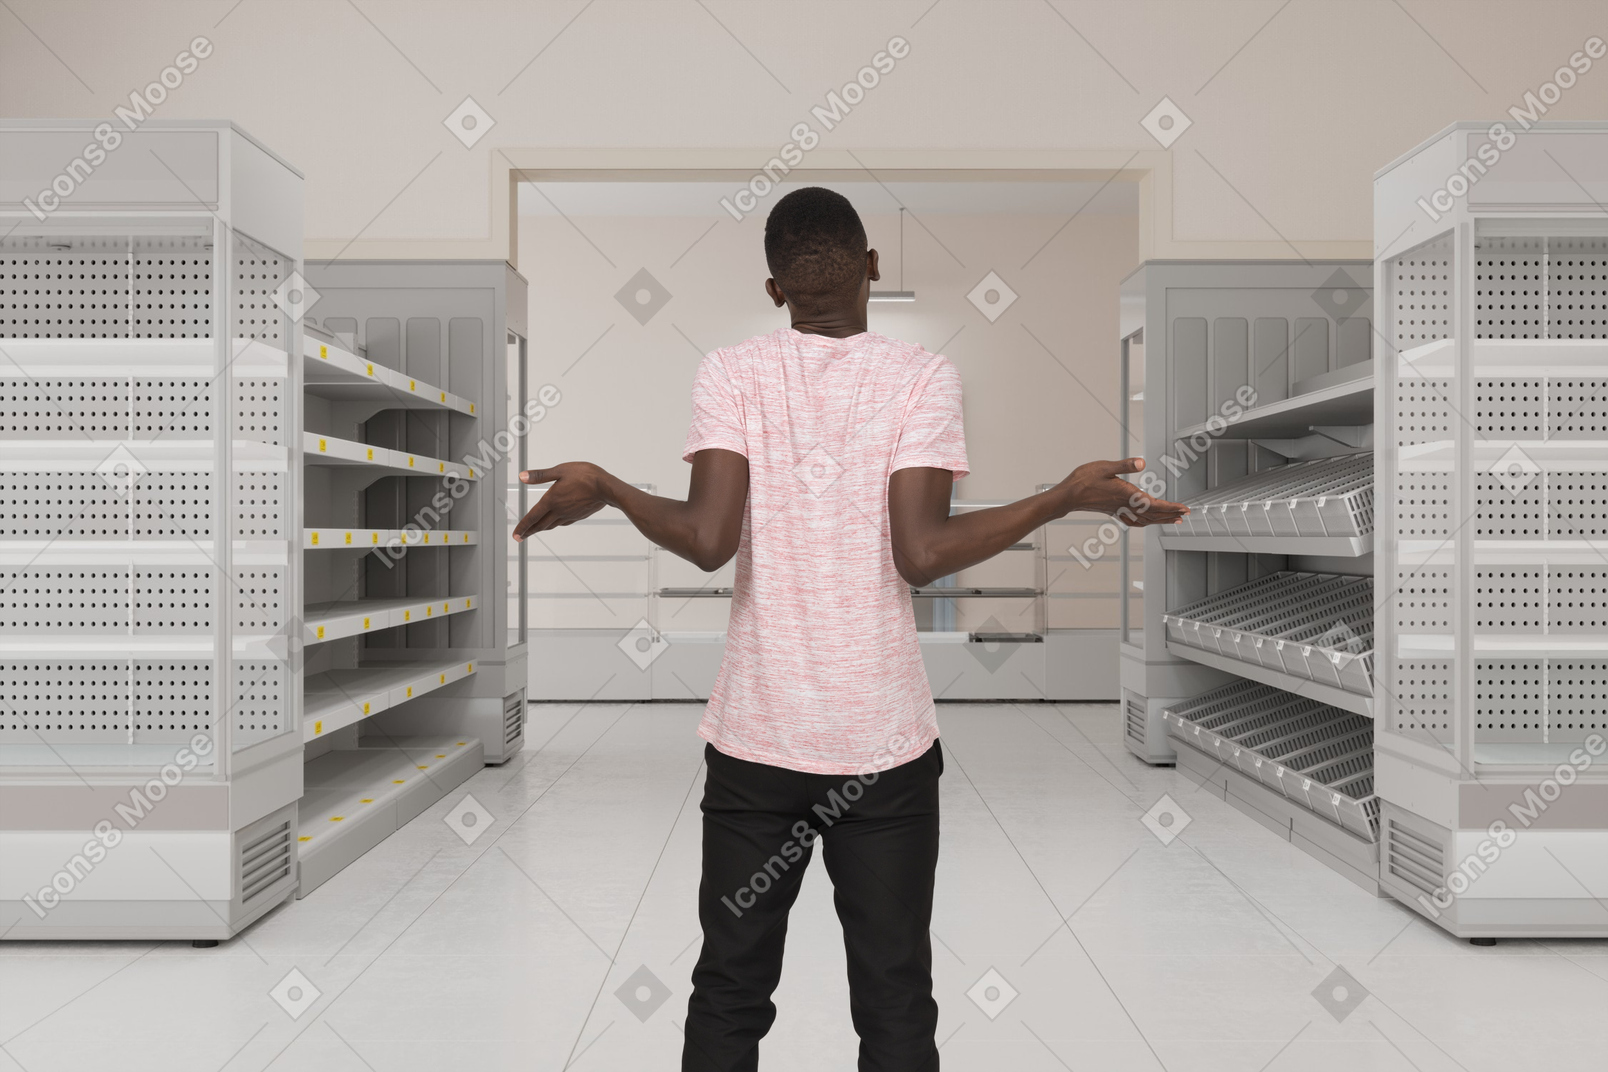 Confused man standing next to empty supermarket shelves